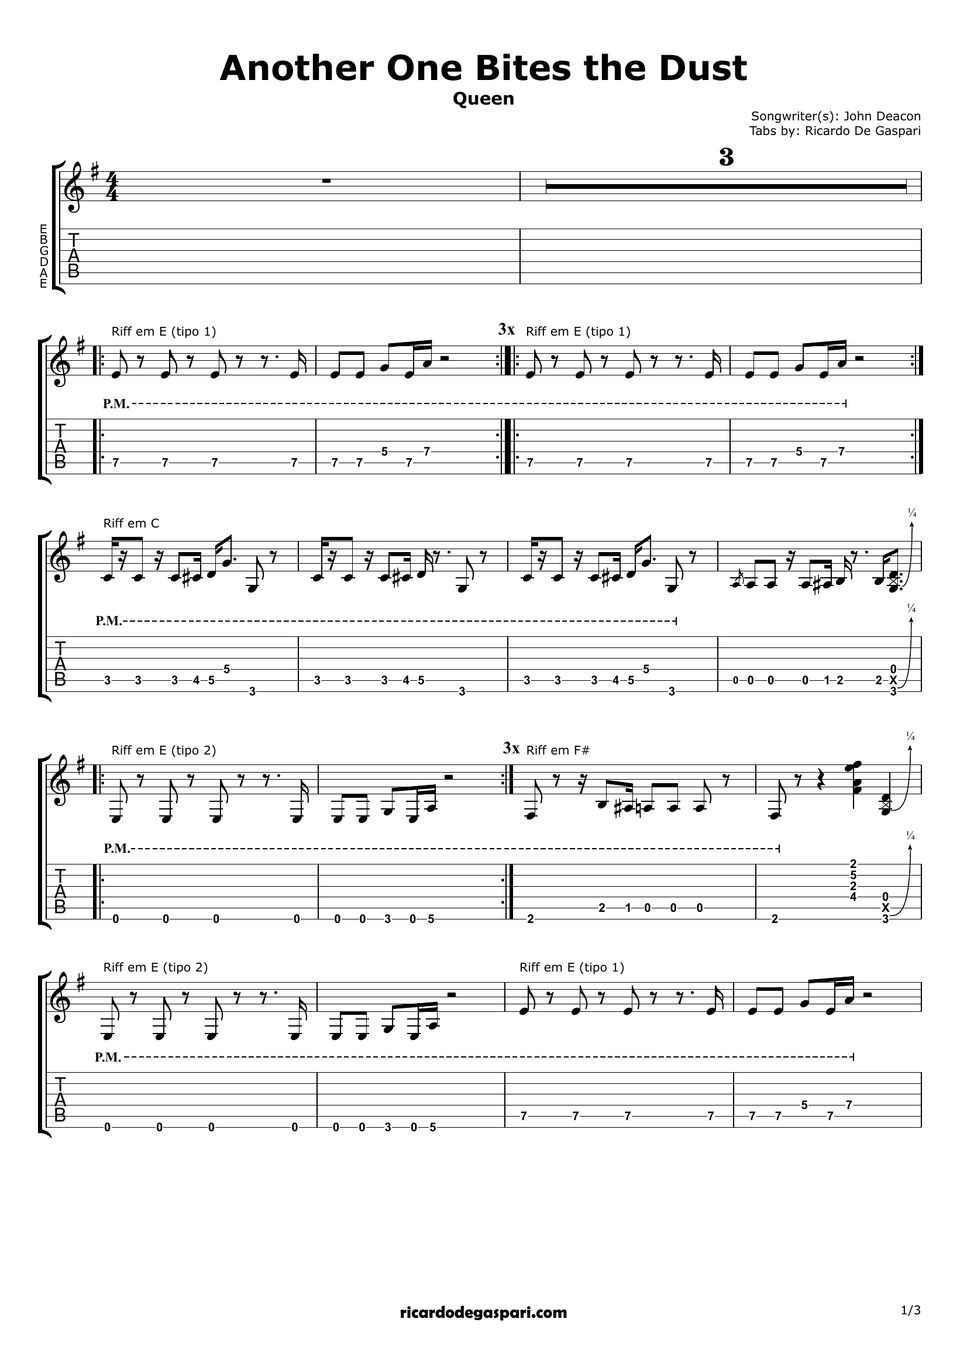 Queen - Another One Bites The Dust (for one guitar) Sheets by Ricardo ...